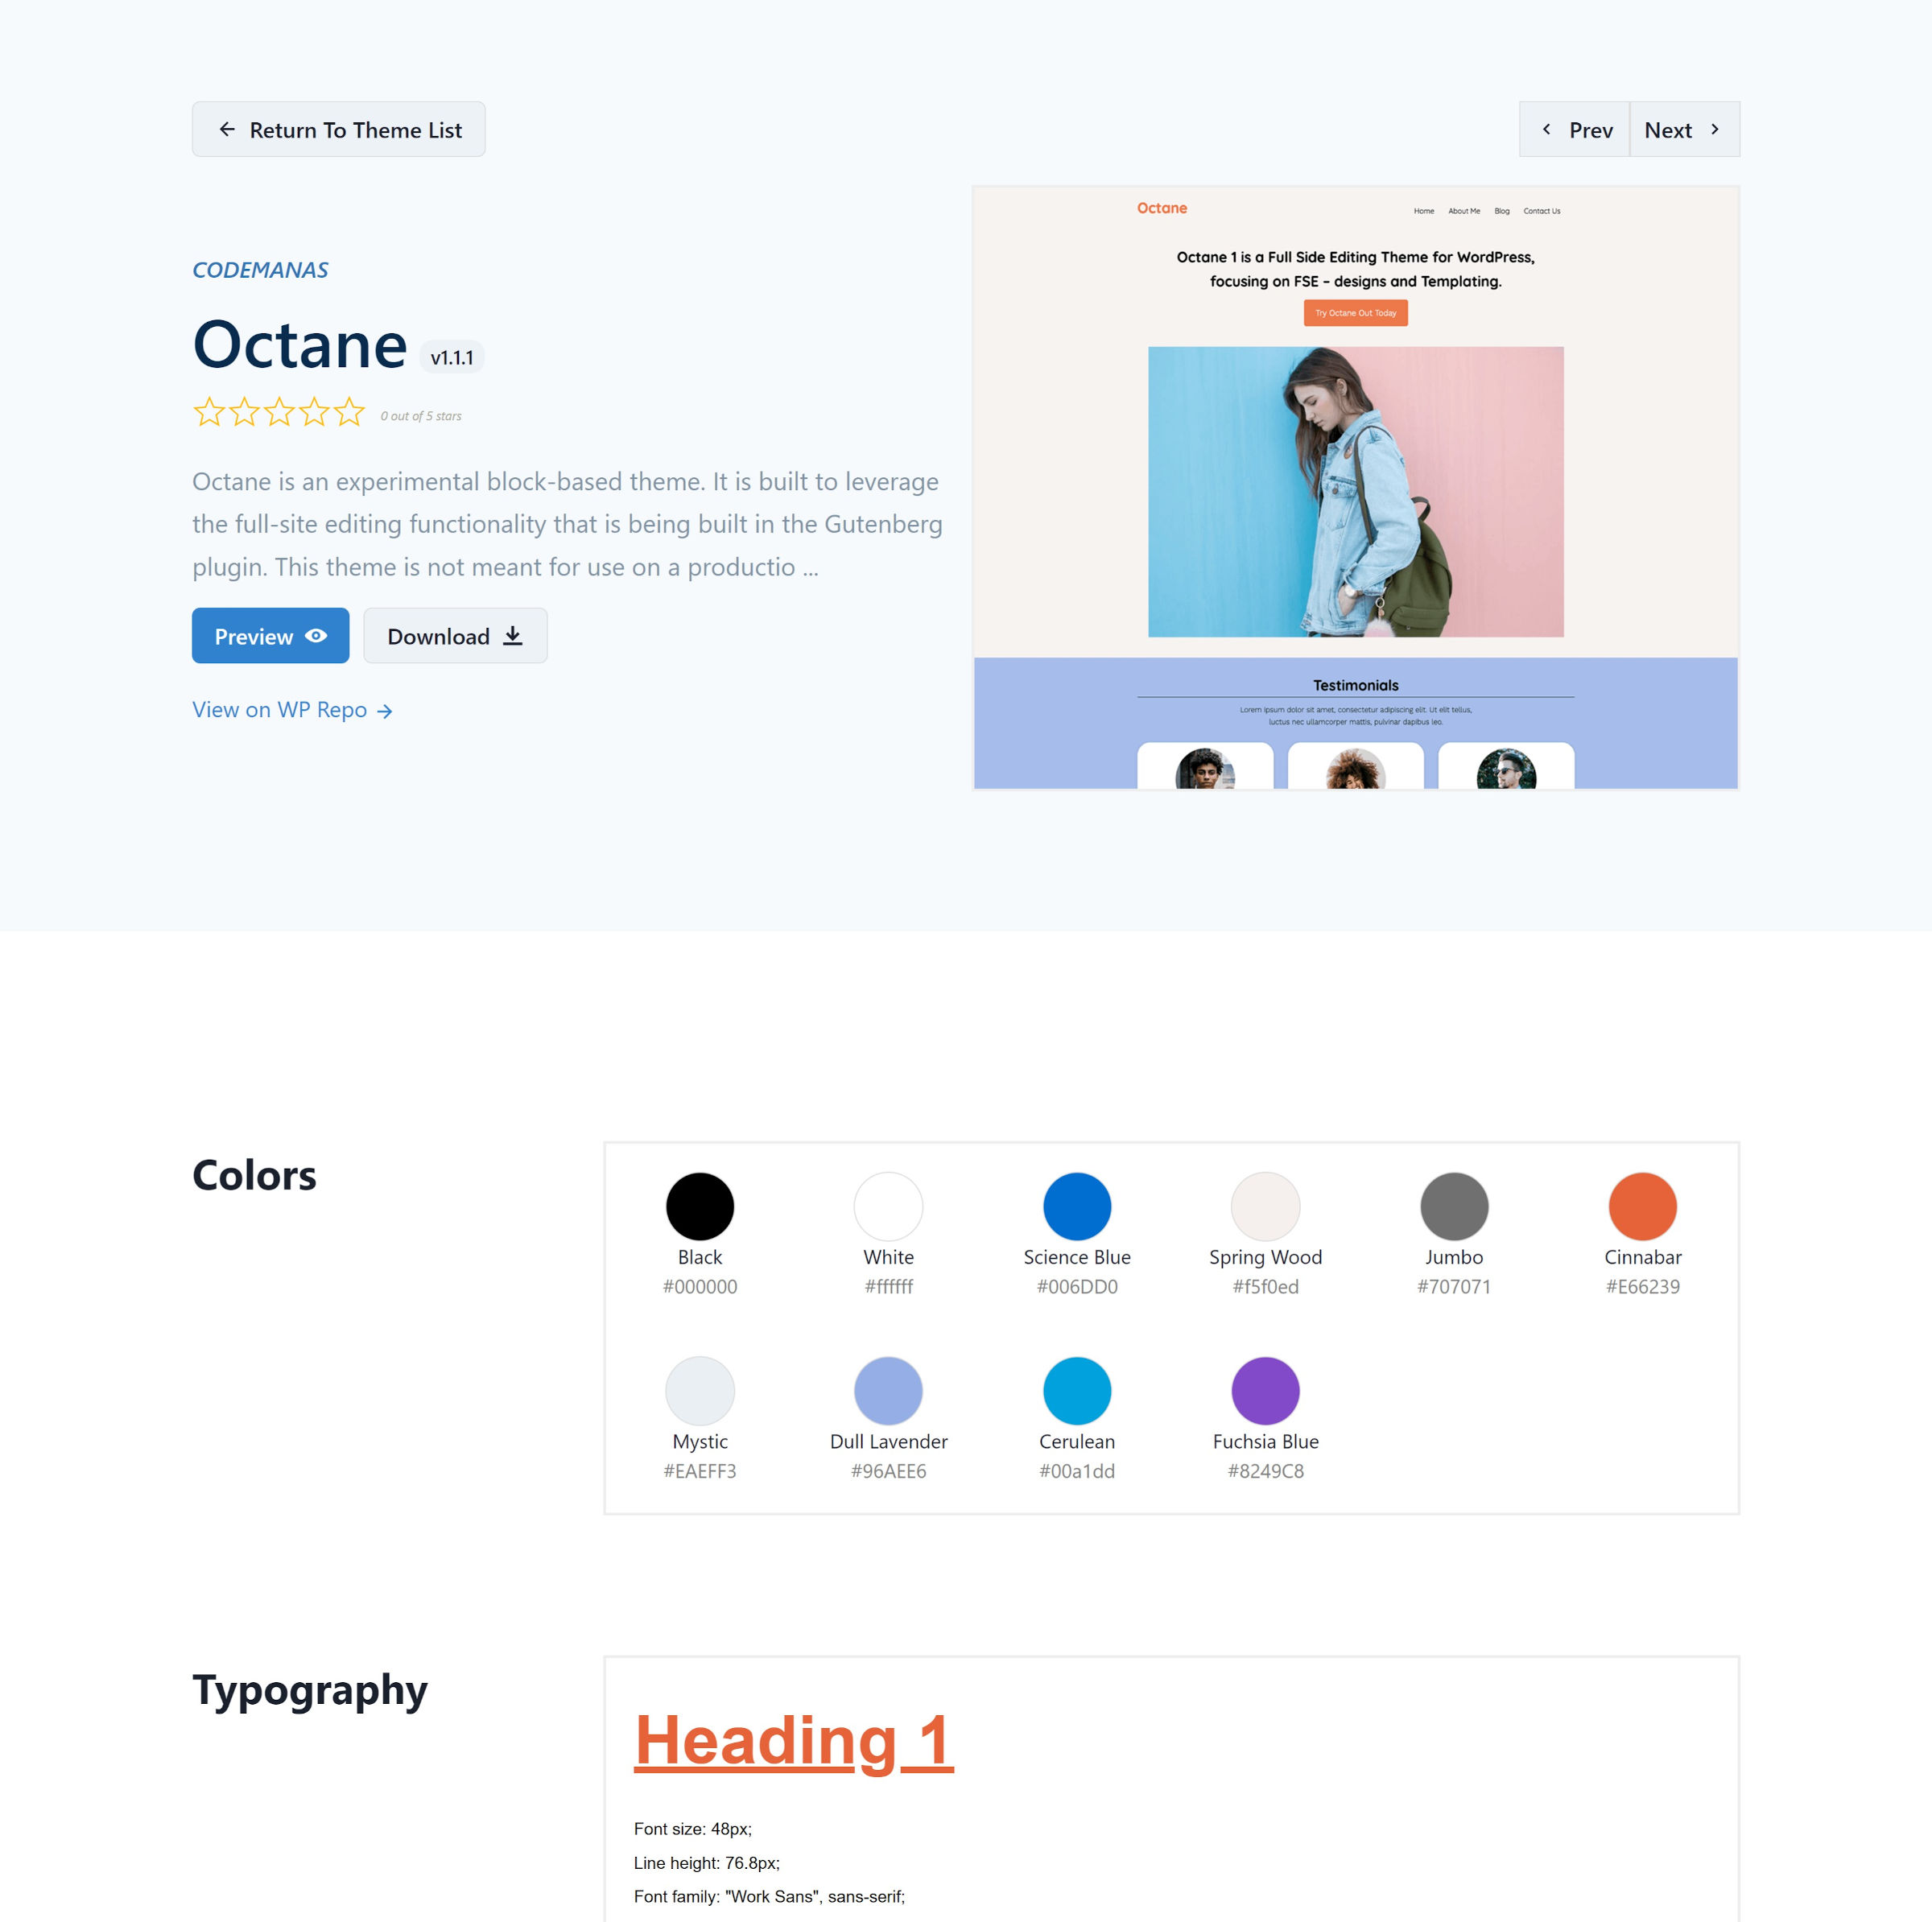 Screenshot of Octane WordPress theme page on Gutenberg Hub.  Includes theme description, screenshot, colors, and typographic sections.